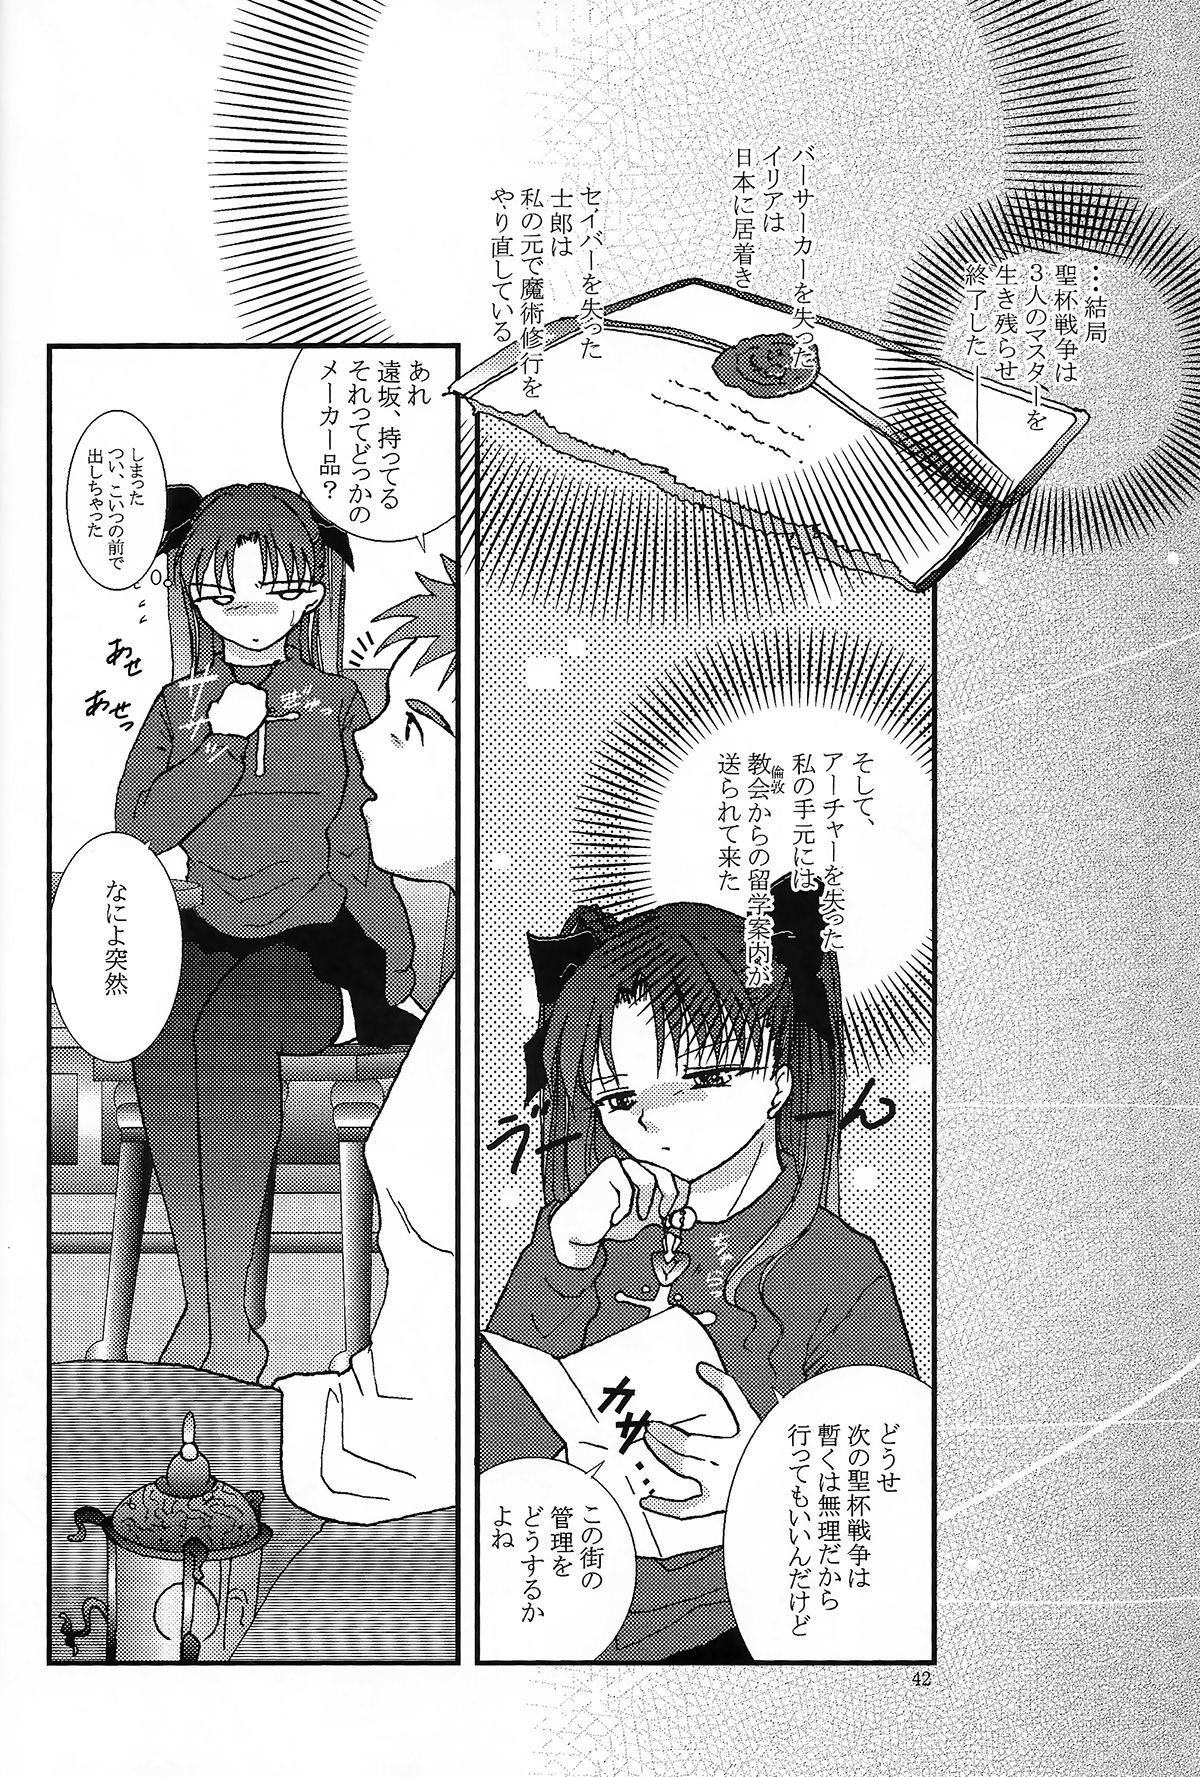 (SC24) [Takeda Syouten (Takeda Sora)] Question-7 (Fate/stay night) page 40 full